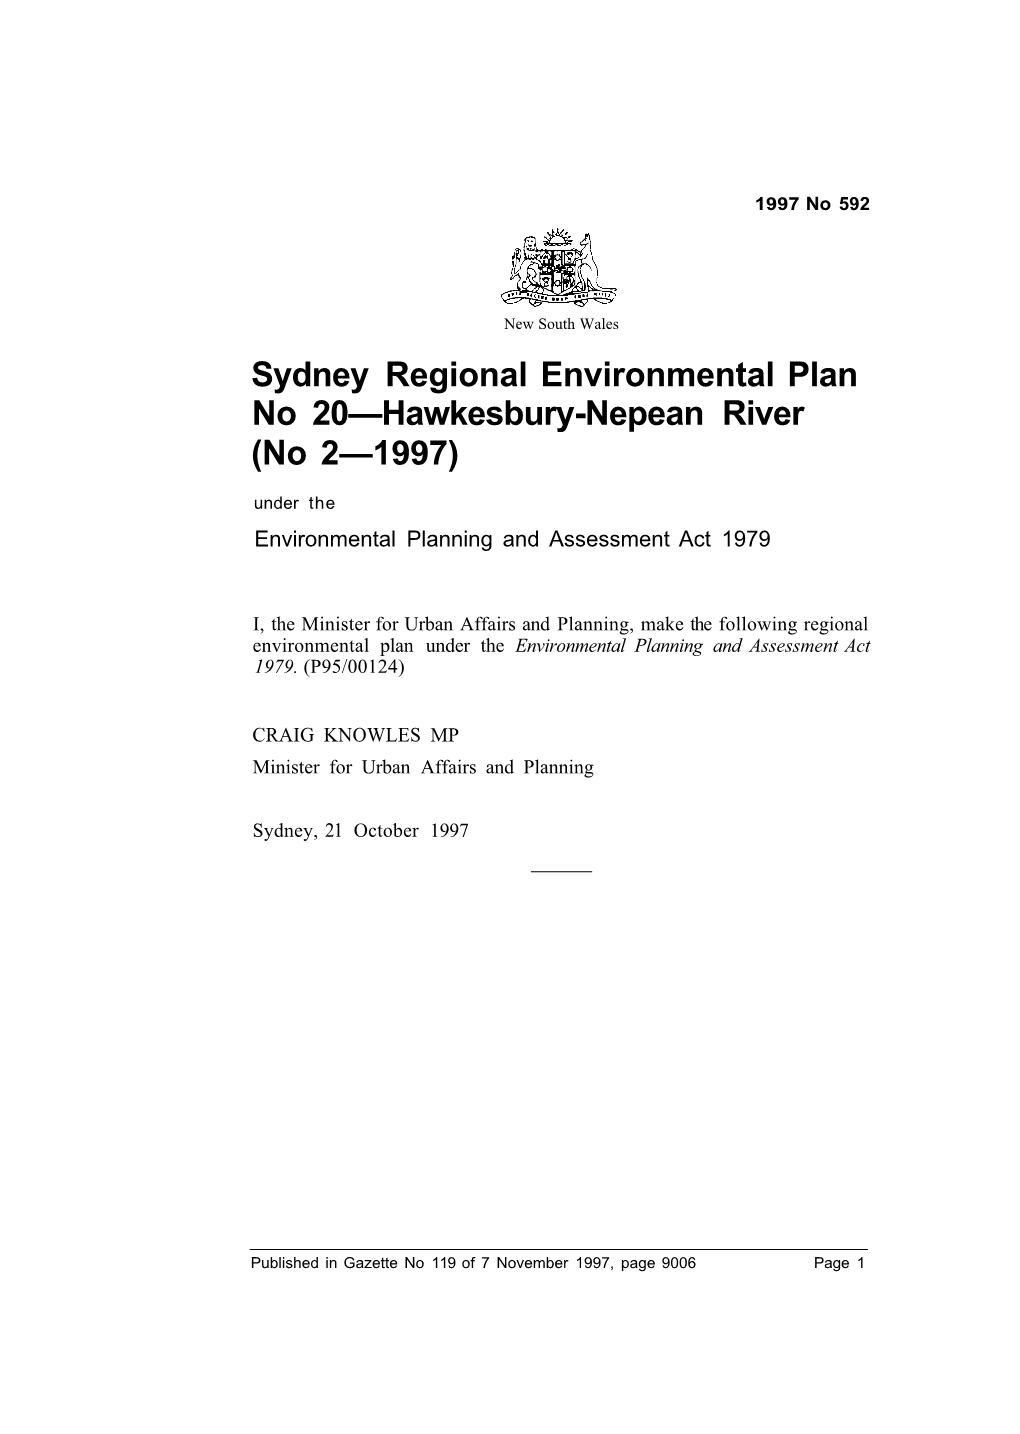 Sydney Regional Environmental Plan No 20—Hawkesbury-Nepean River (No 2—1997) Under the Environmental Planning and Assessment Act 1979